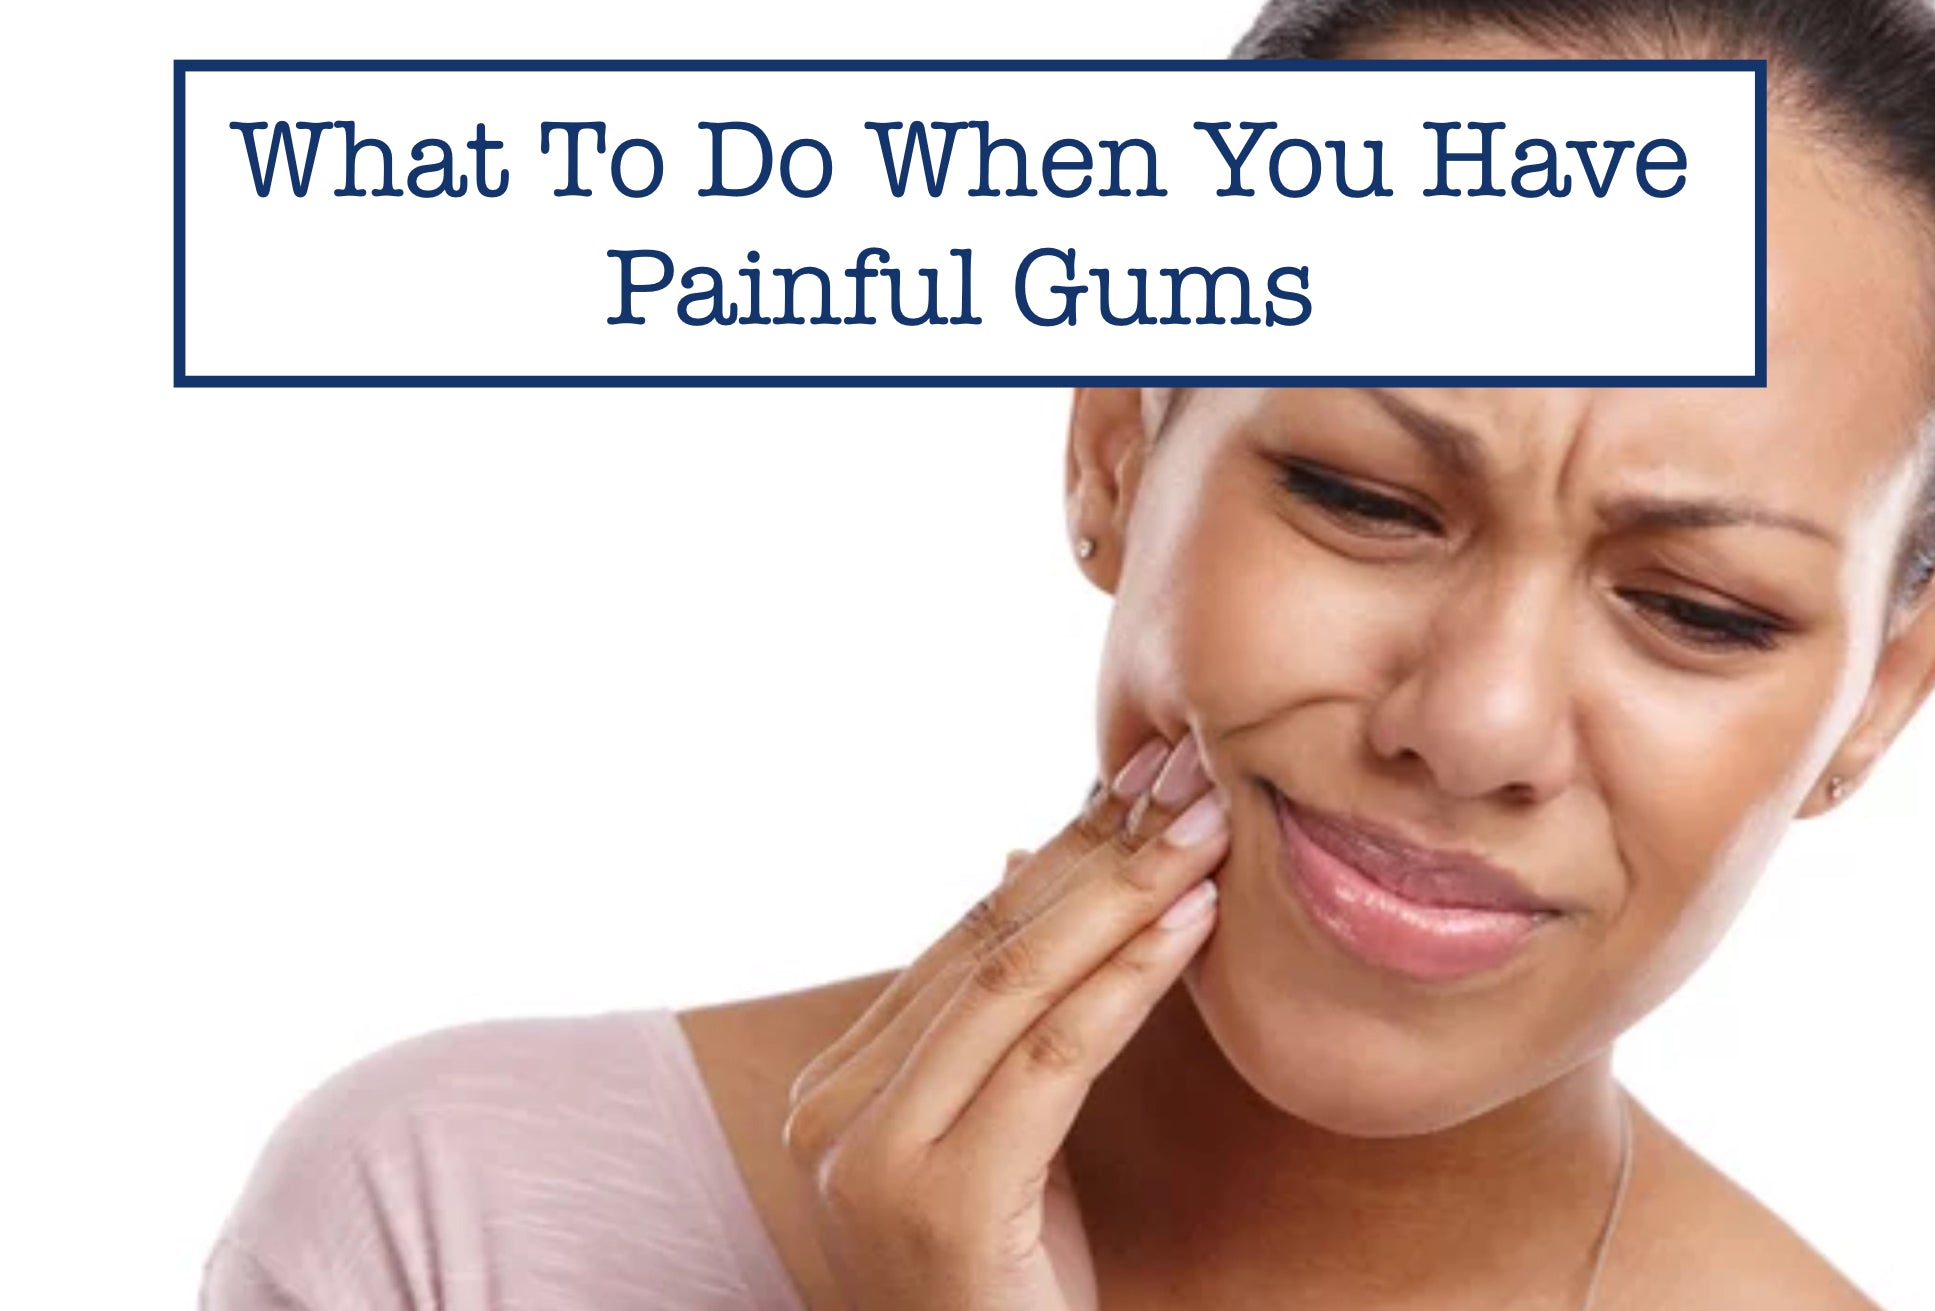 What To Do When You Have Painful Gums: Causes, Treatments, and Prevention